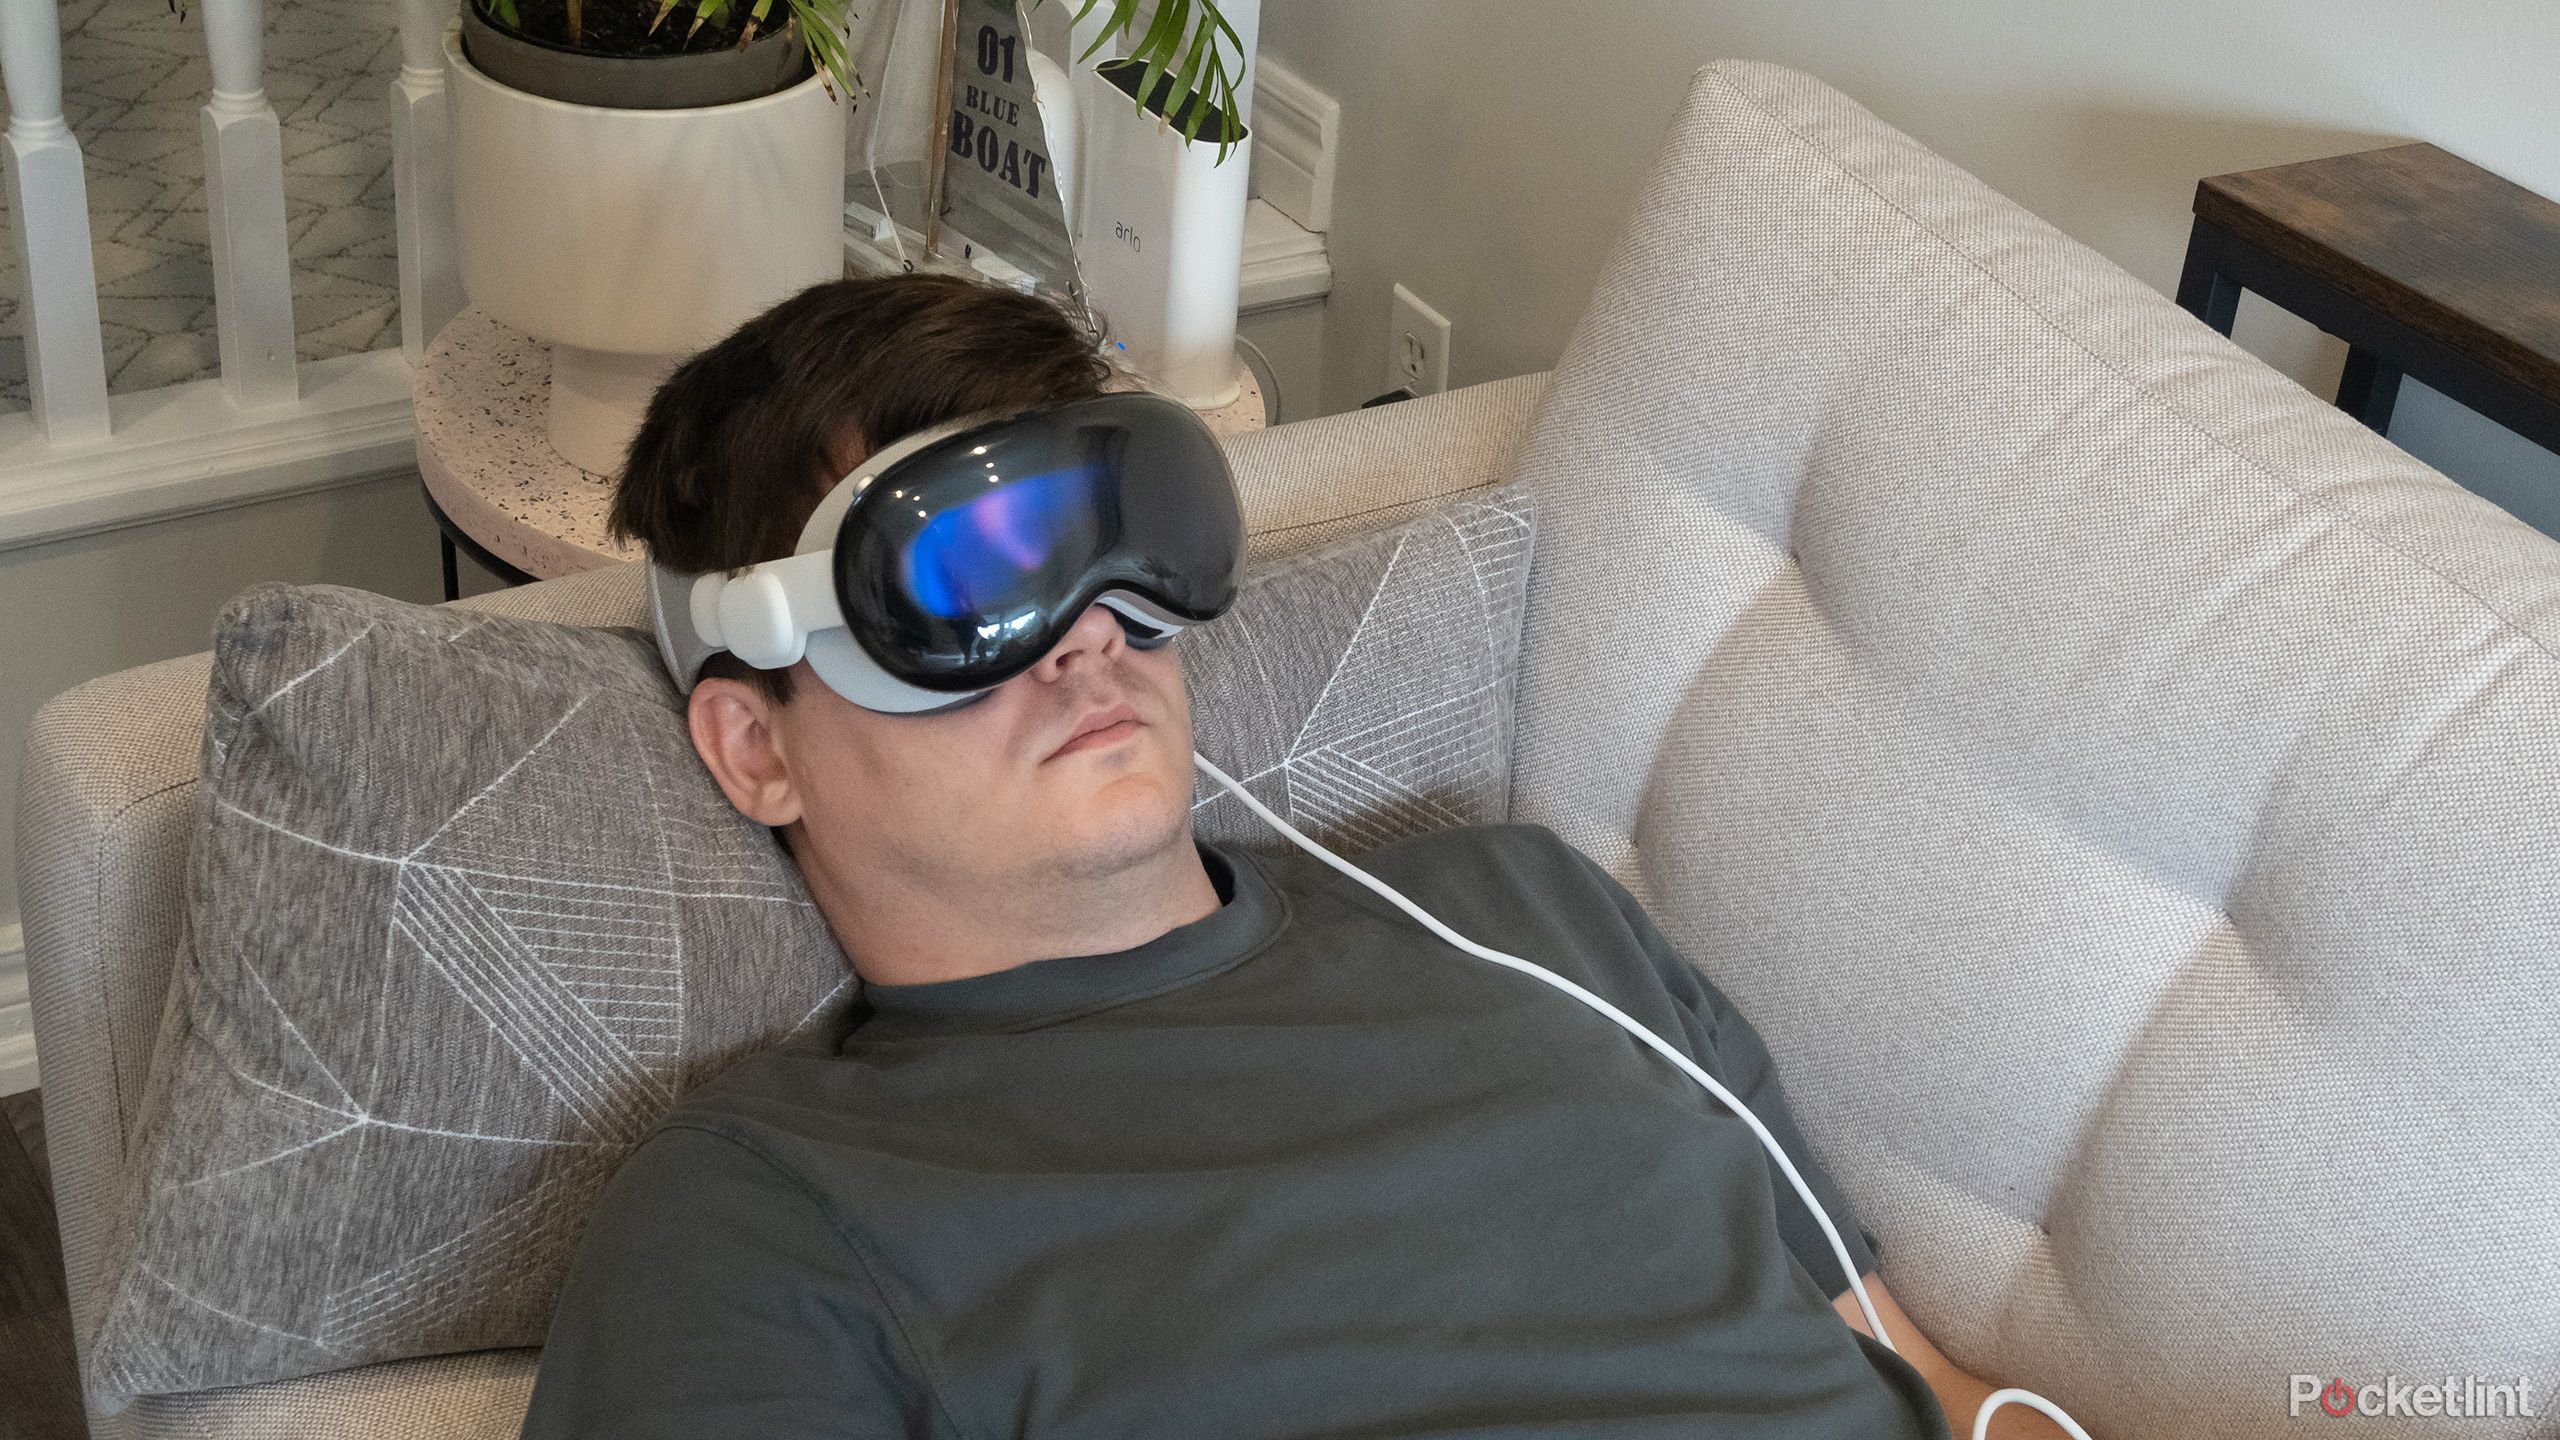 Wearing the Vision Pro on a couch